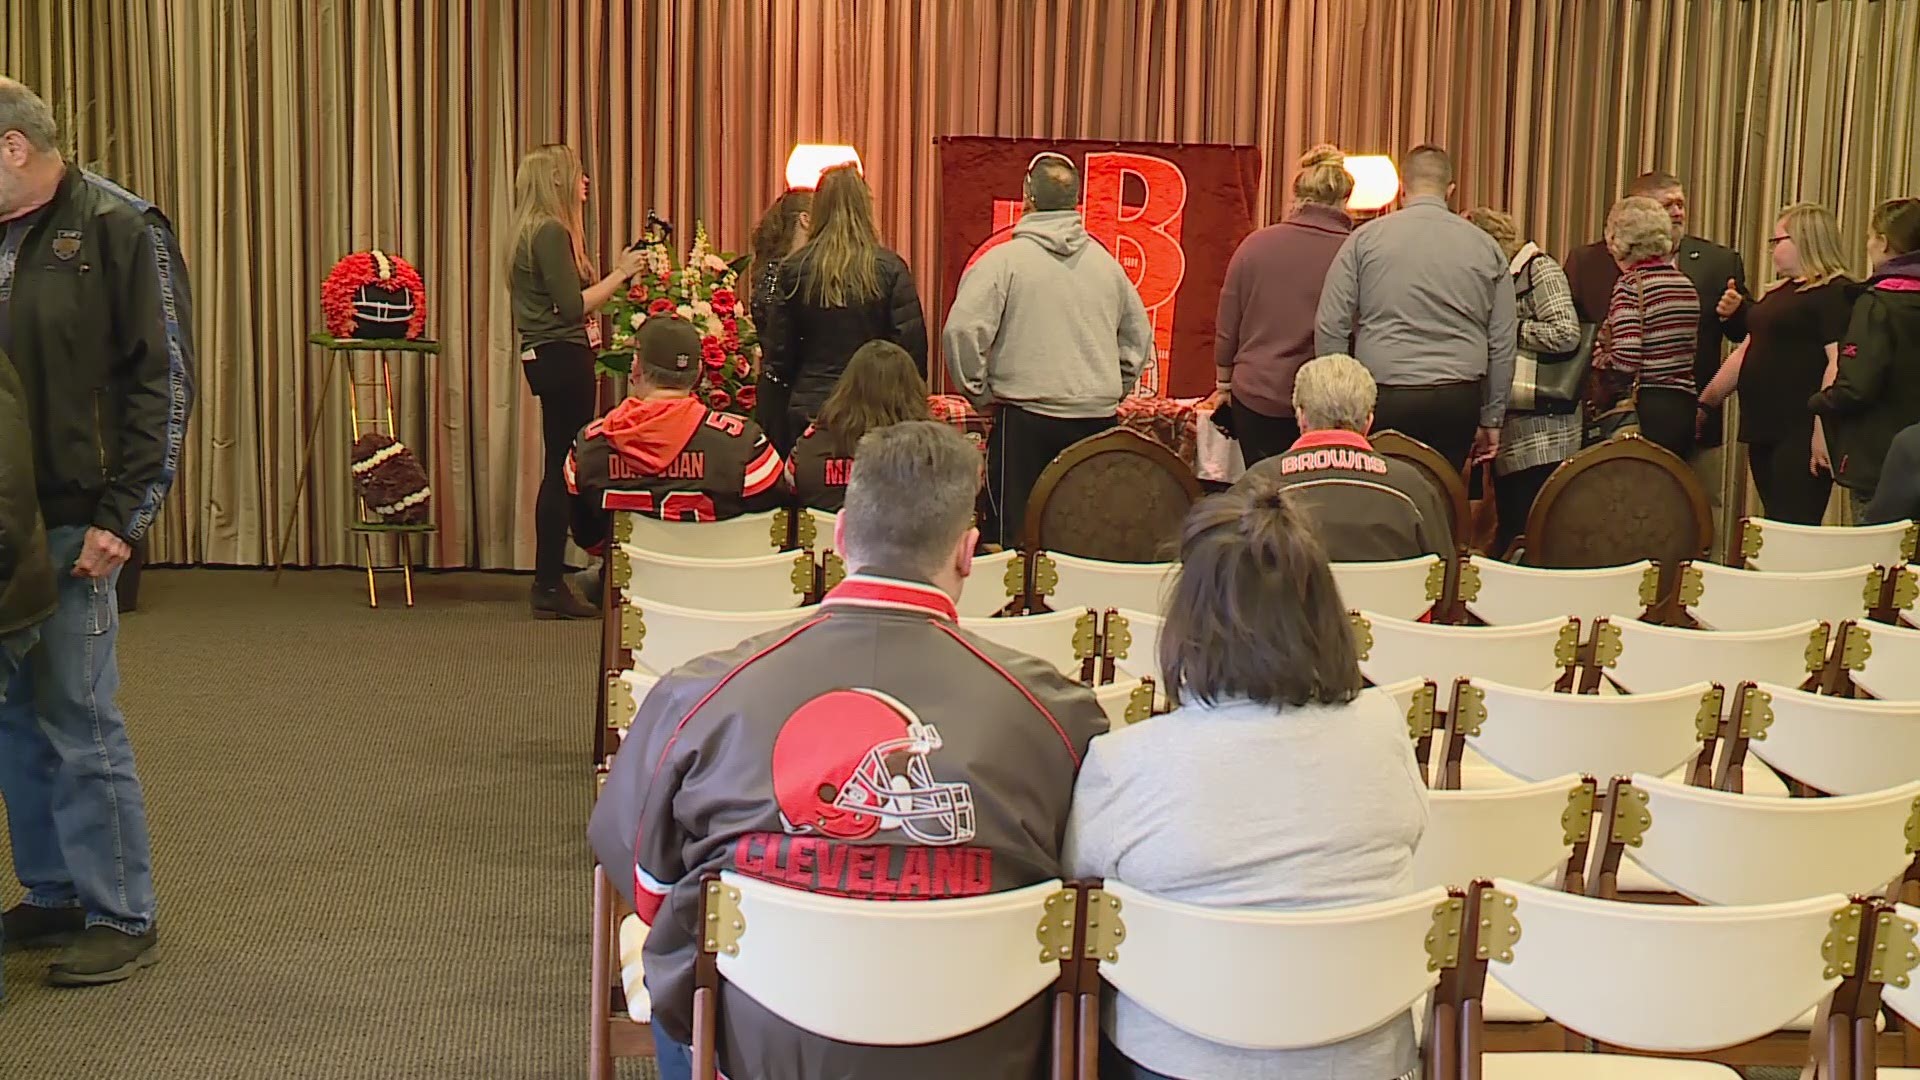 A memorial service for Swagger took place Saturday in Willoughby Hills. The bullmastiff died earlier this month at the age of 6.